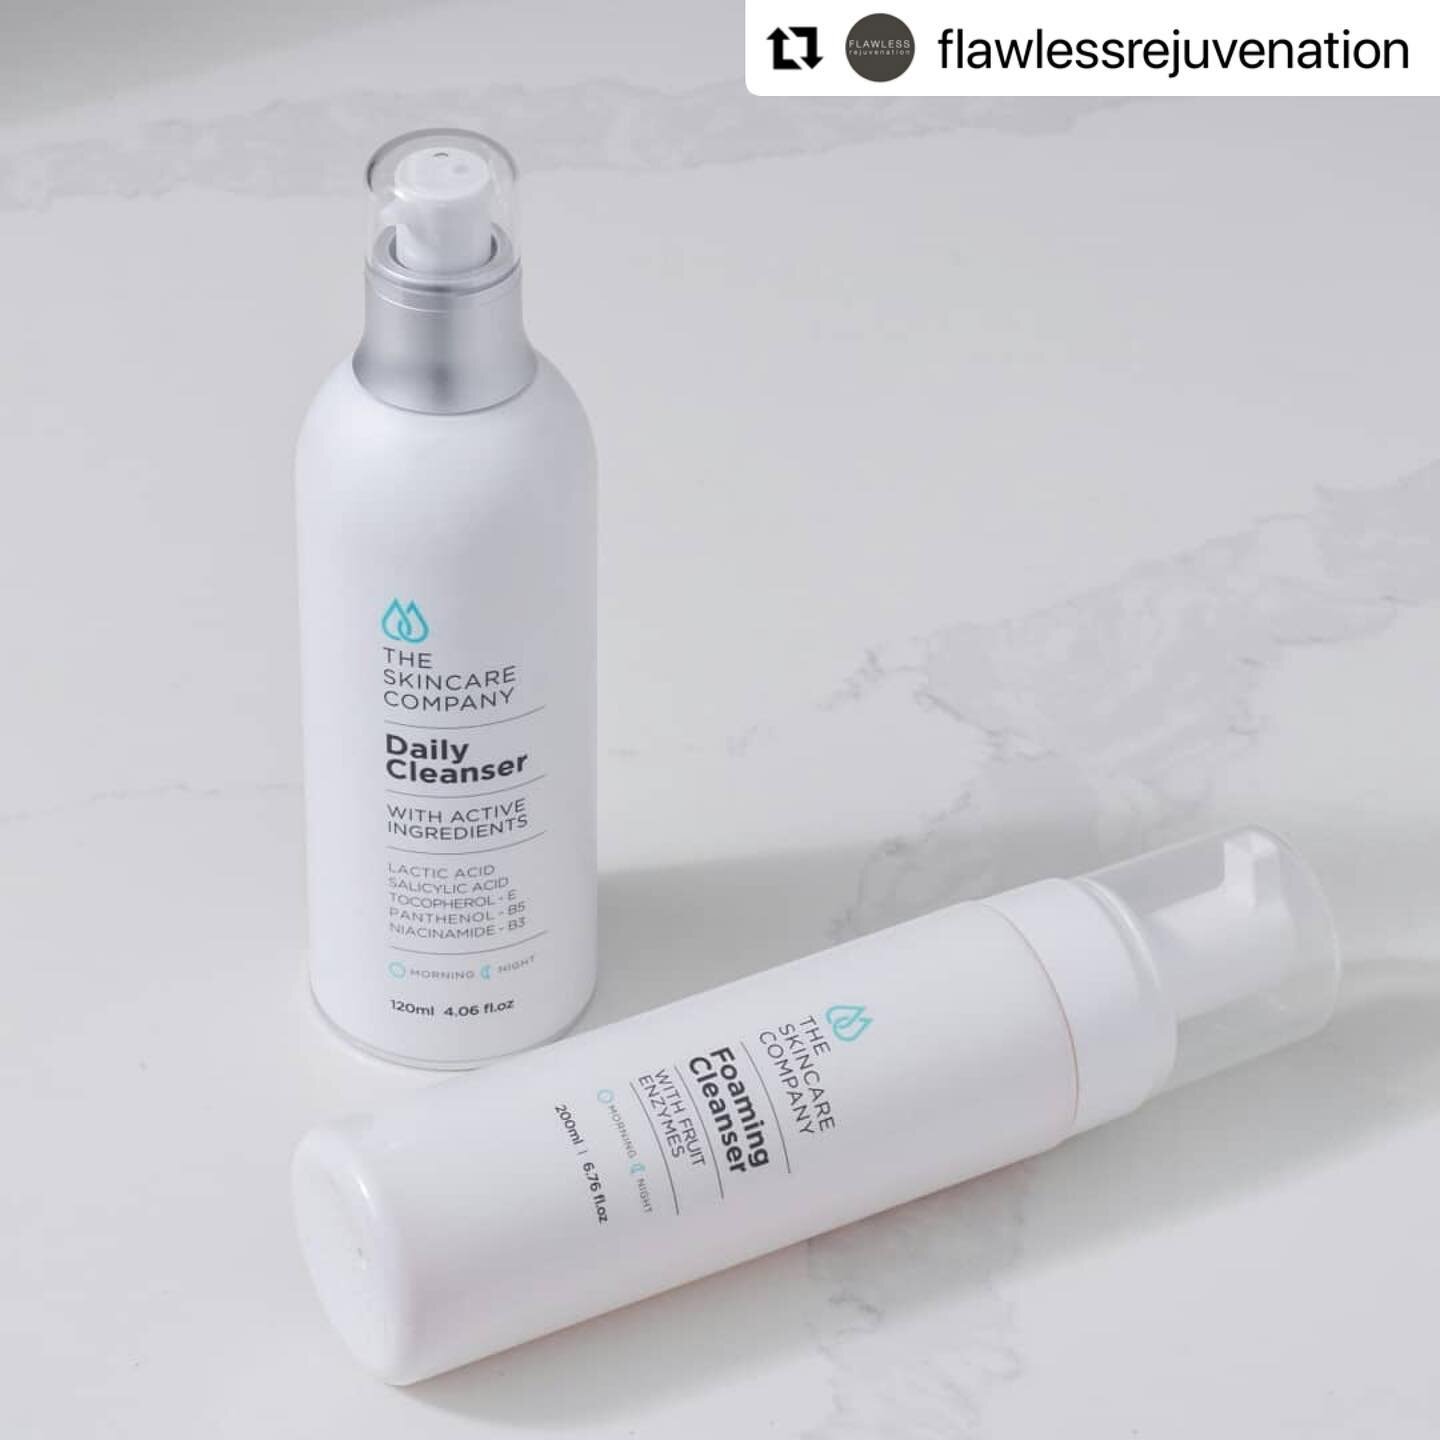 Did you know you can use your clinic photography setup to take product photos too? 

The area has many uses depending on the angle. 

Book in a consult via our bio if you want to know more :) 

&mdash;&mdash;&mdash;

#Repost @flawlessrejuvenation wit